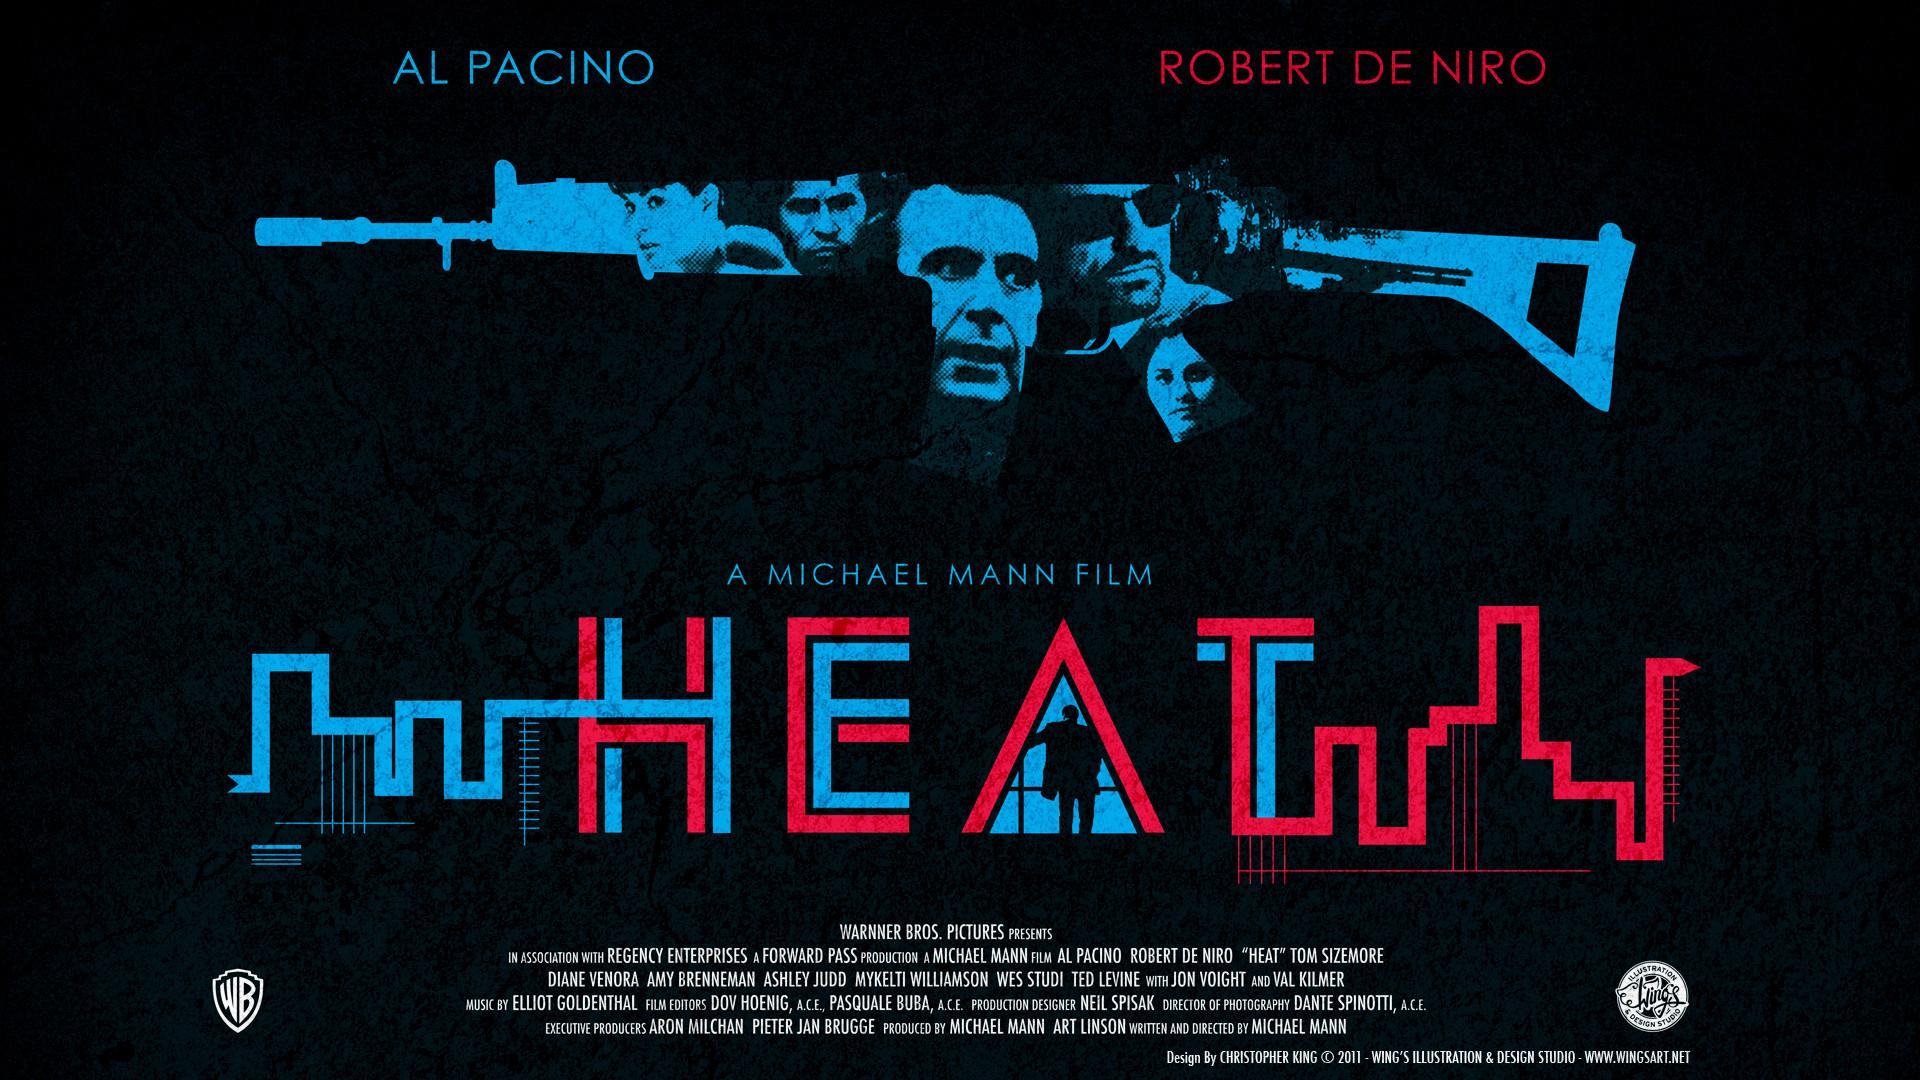 Things You Never Knew About 'Heat' the Box